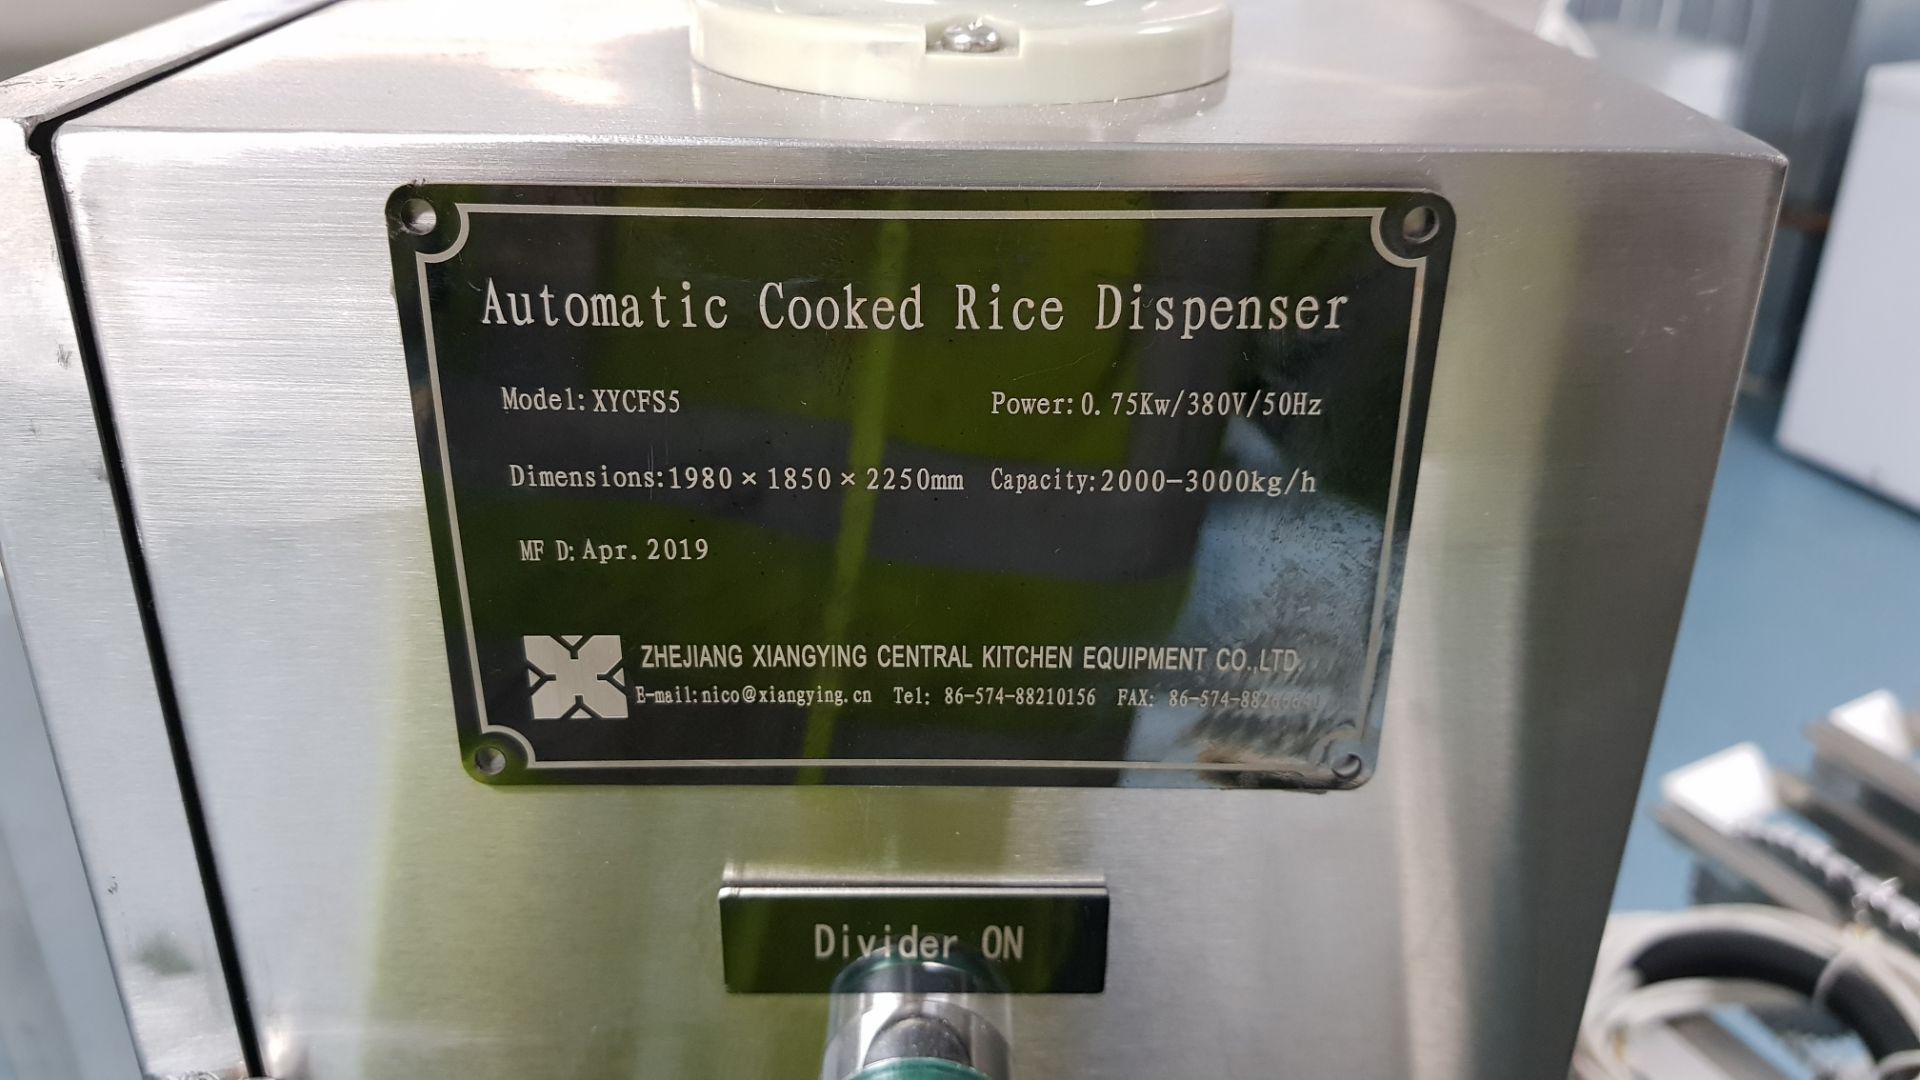 XIANGYING CENTRAL KITCHEN EQUIPMENT STAINLESS STEEL AUTOMATIC COOKED RICE DISPENSER (MODEL XYCFS5) - Image 4 of 4